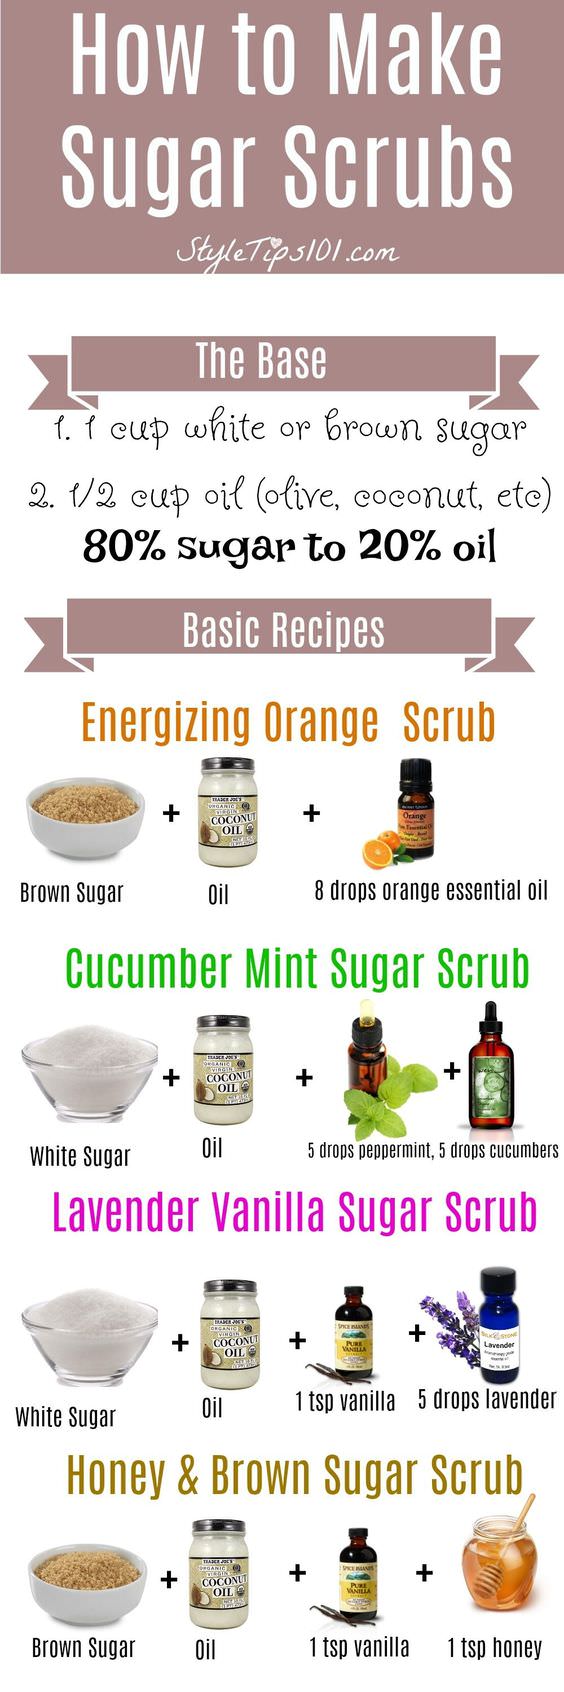 Learn how to make sugar scrubs at home by using the 80-20 ratio. Use 80% sugar to 20% oil, and add in your favorite essential oils!